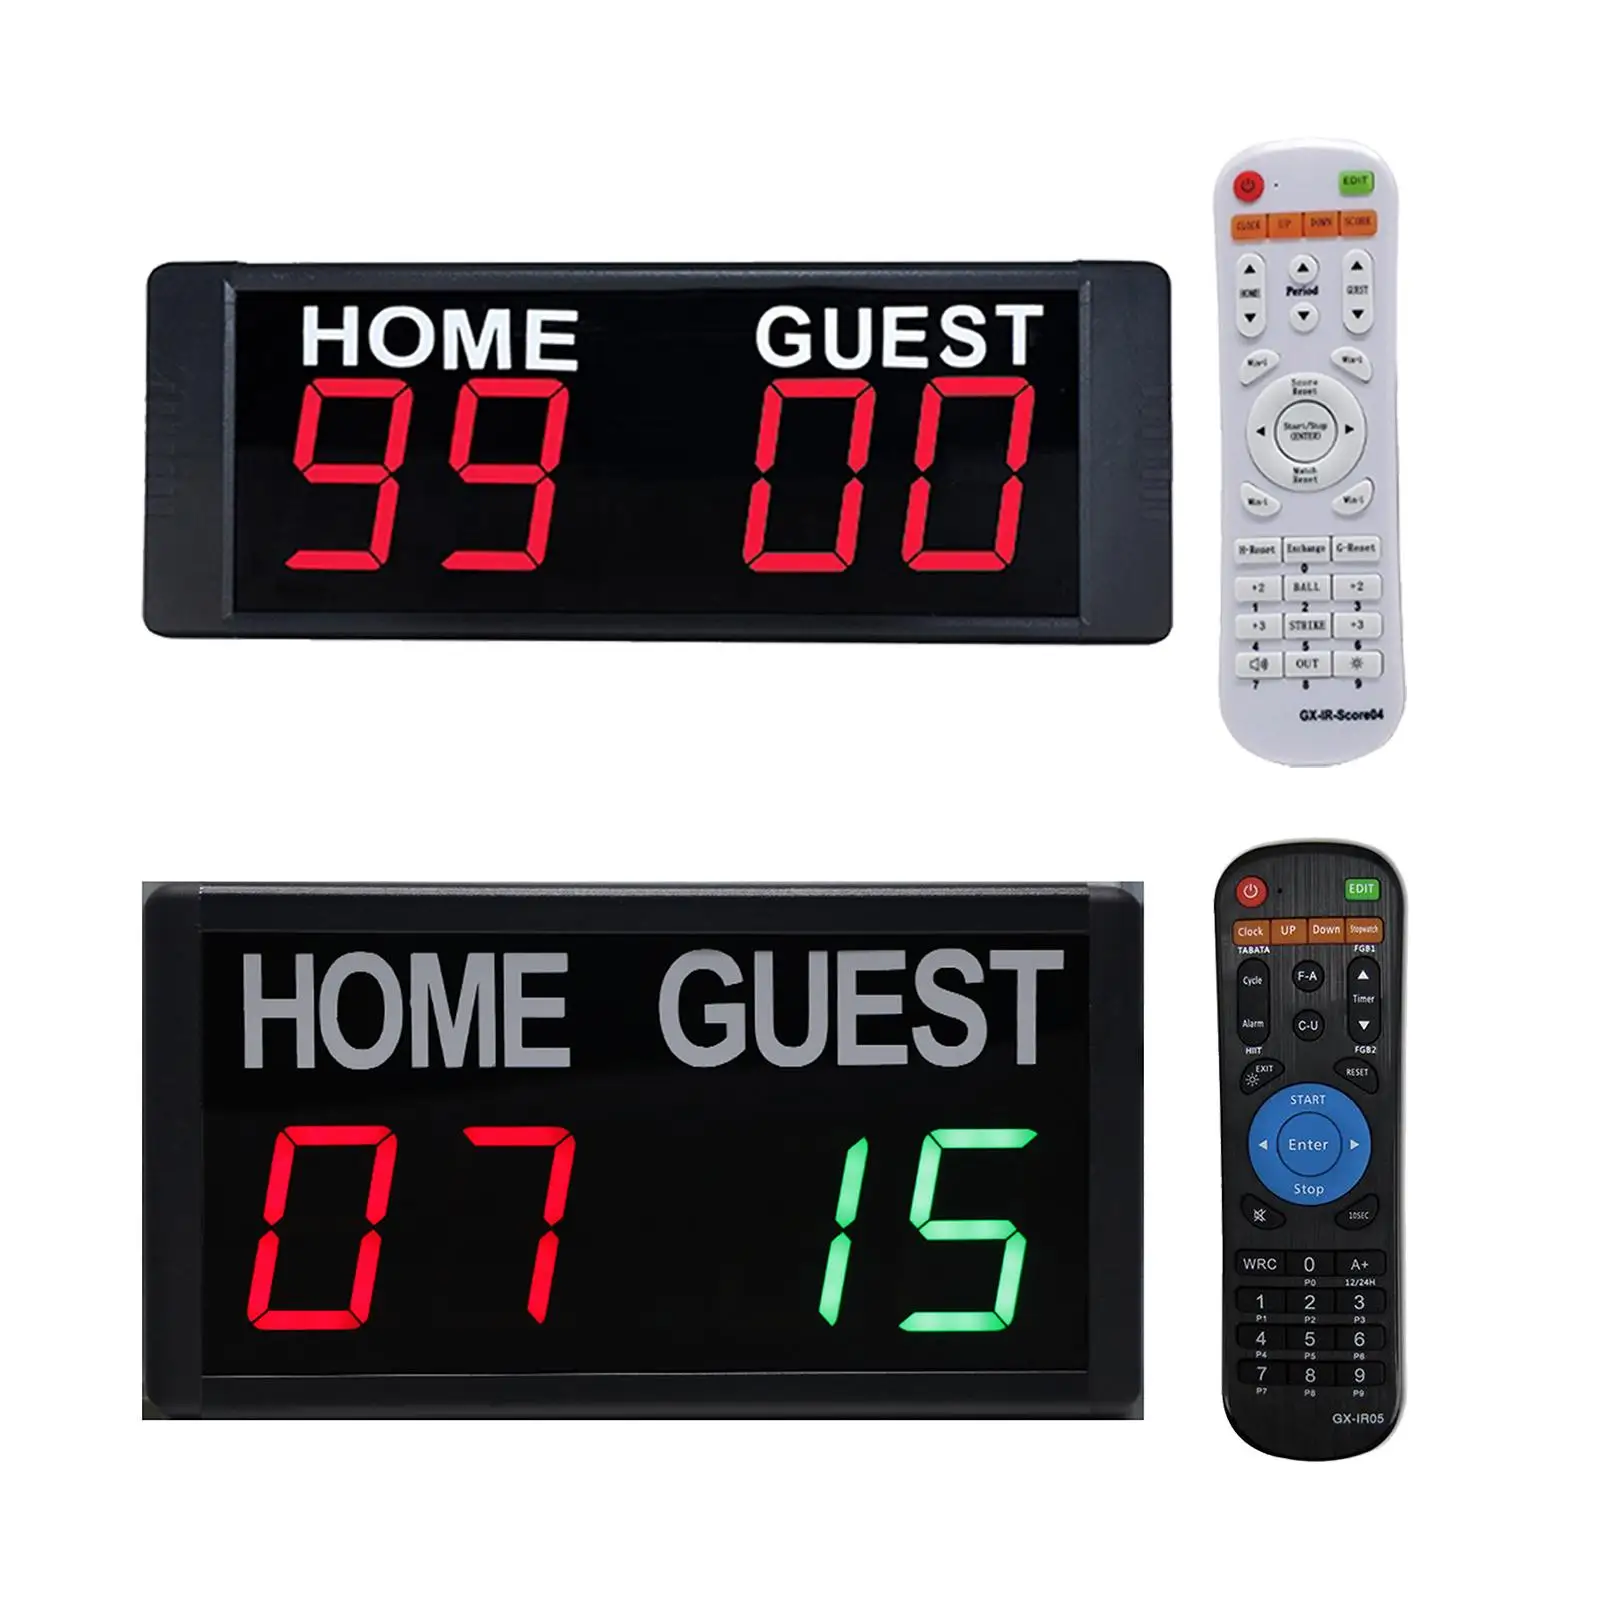 Wall Mounted Electronic Digital Scoreboard Remote Control Score Keeper Counter for Basketball Soccer Badminton Sports Wrestling